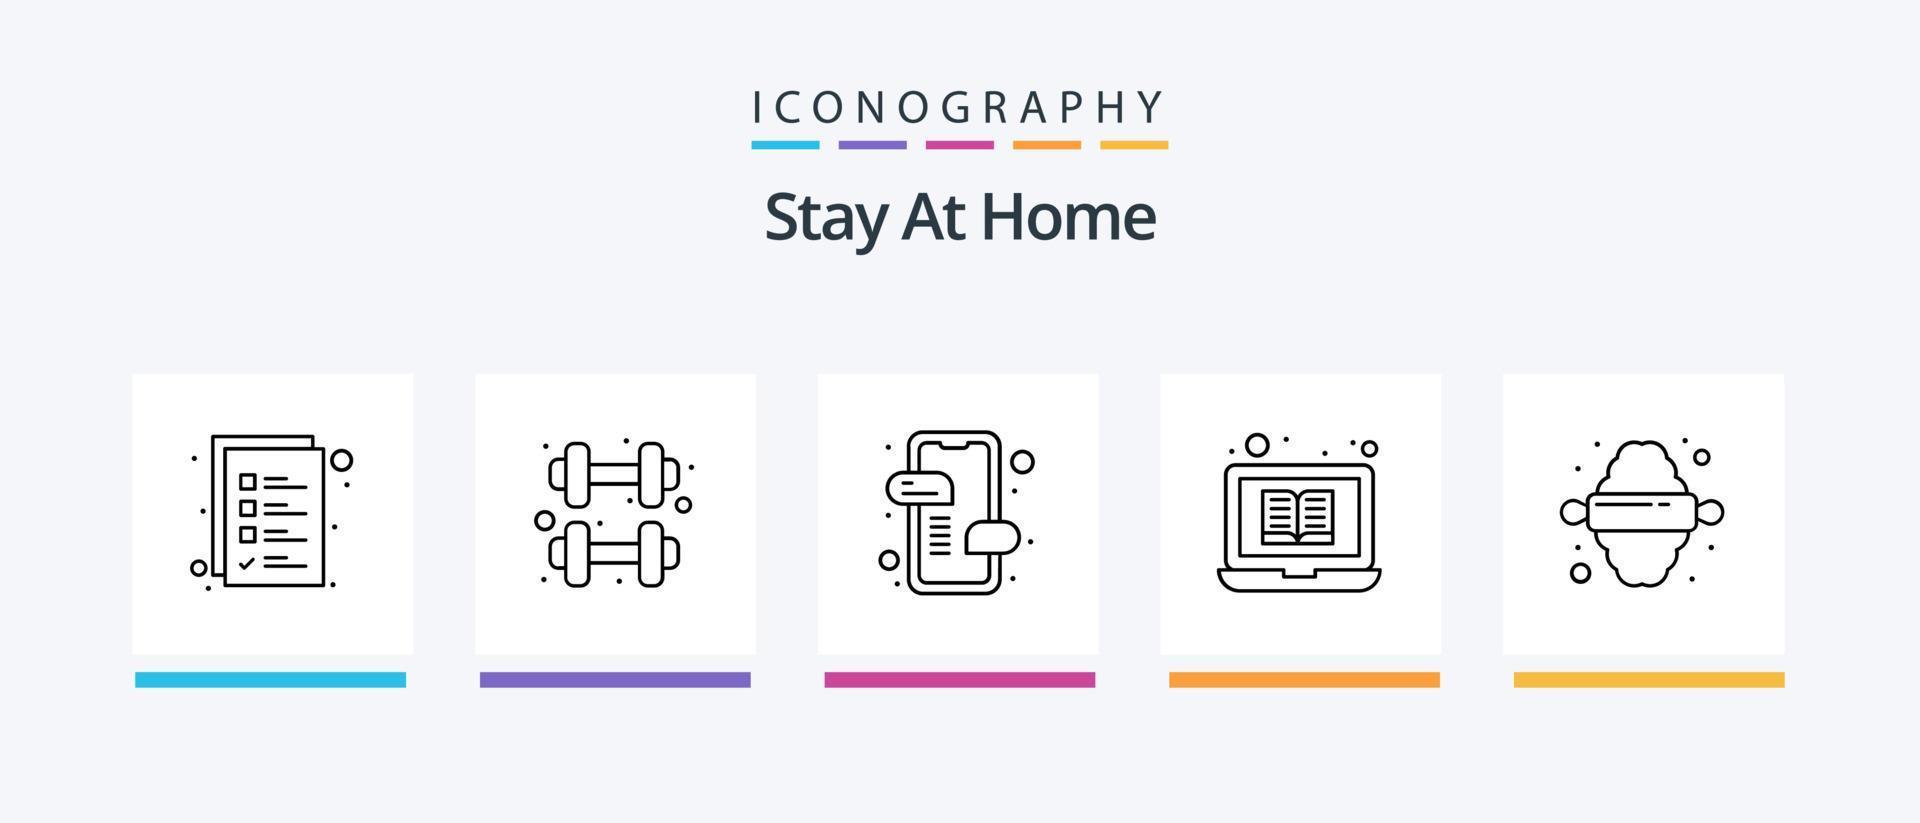 Stay At Home Line 5 Icon Pack Including relax. work. online. tools. repair. Creative Icons Design vector